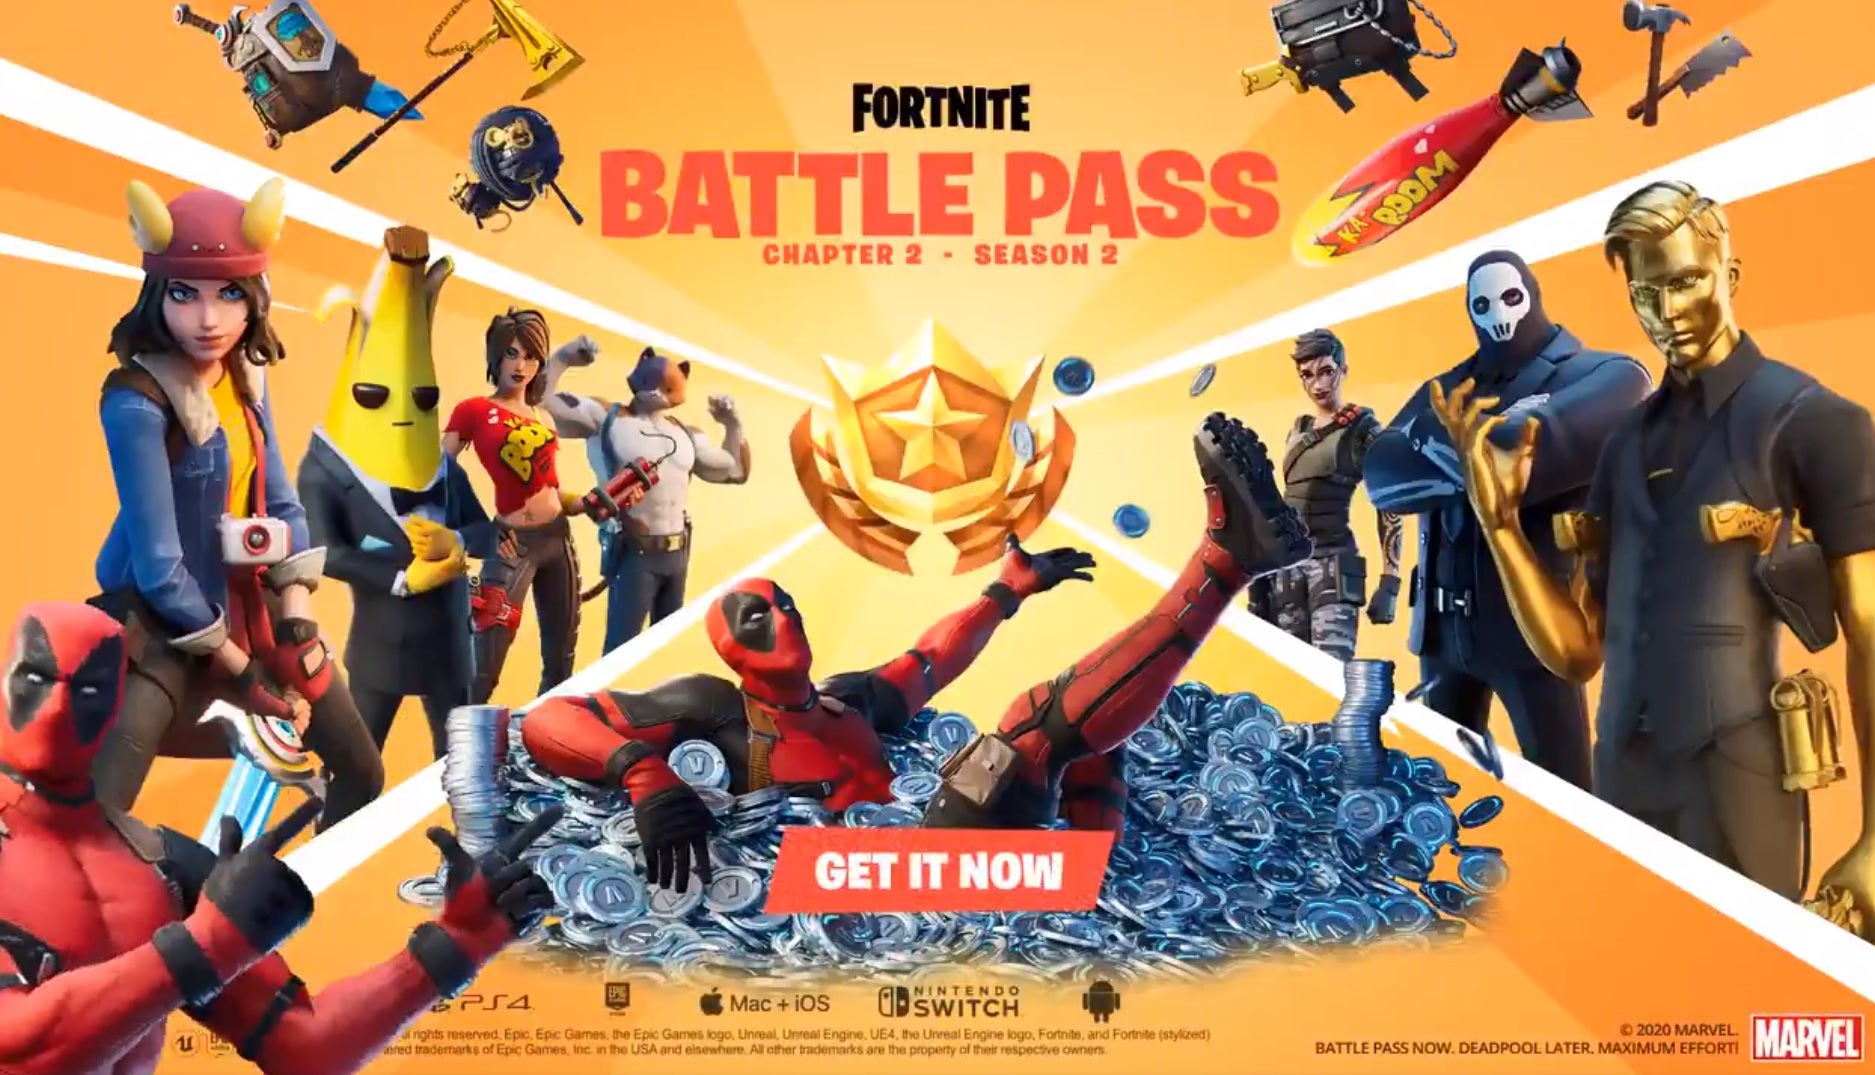 Image for Fortnite: Chapter 2 Season 2 - New Battle Pass trailer shows off recruitable agents and reveals Deadpool cross-over